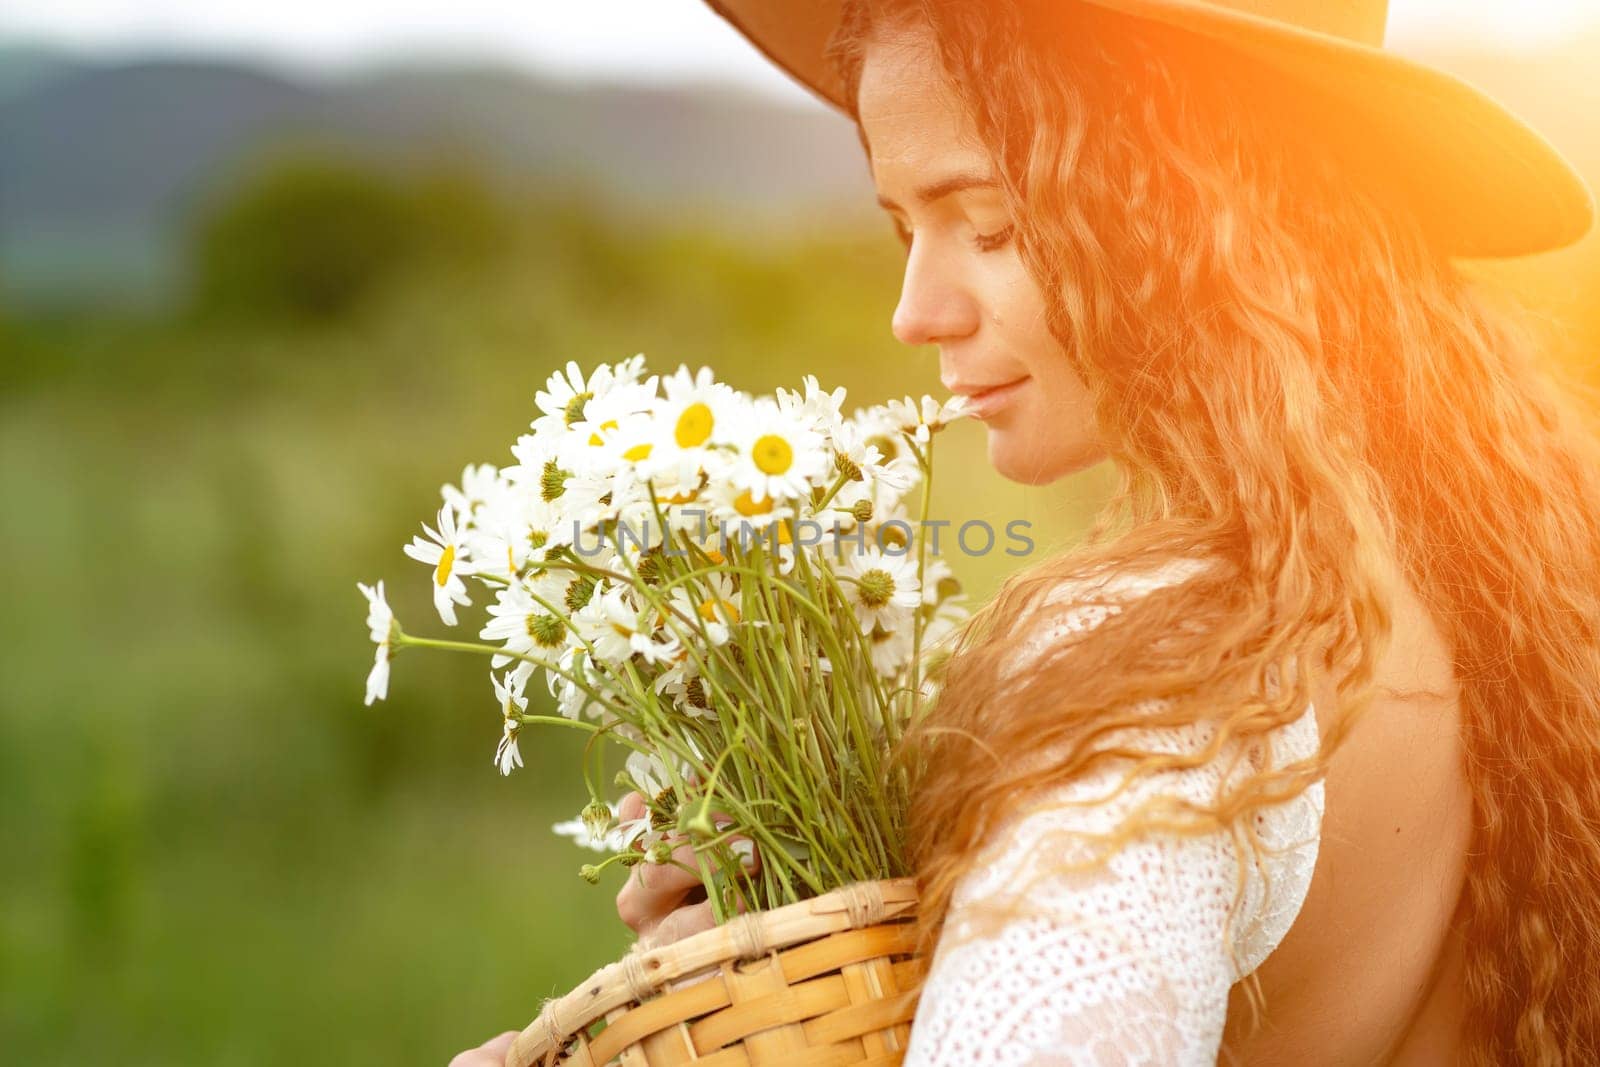 A middle-aged woman in a white dress and brown hat holds a large bouquet of daisies in her hands. Wildflowers for congratulations.